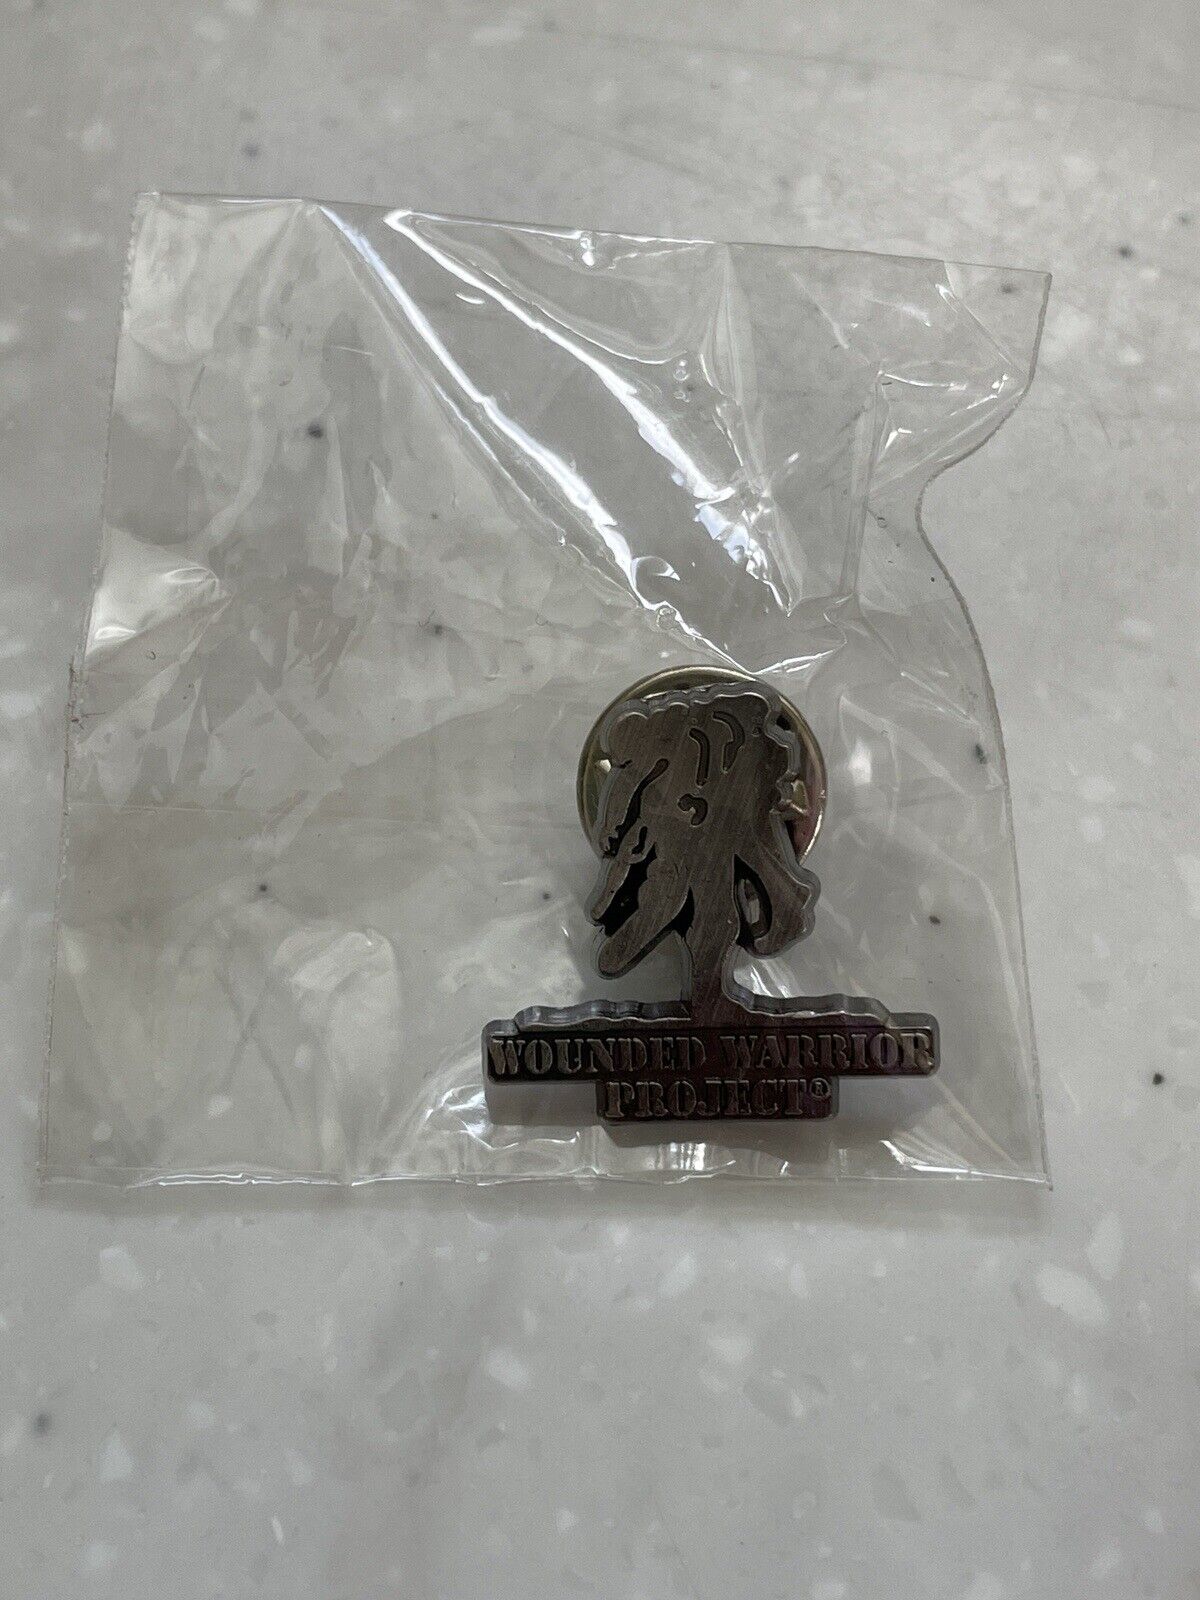 Wounded Warrior Project Lapel Pin